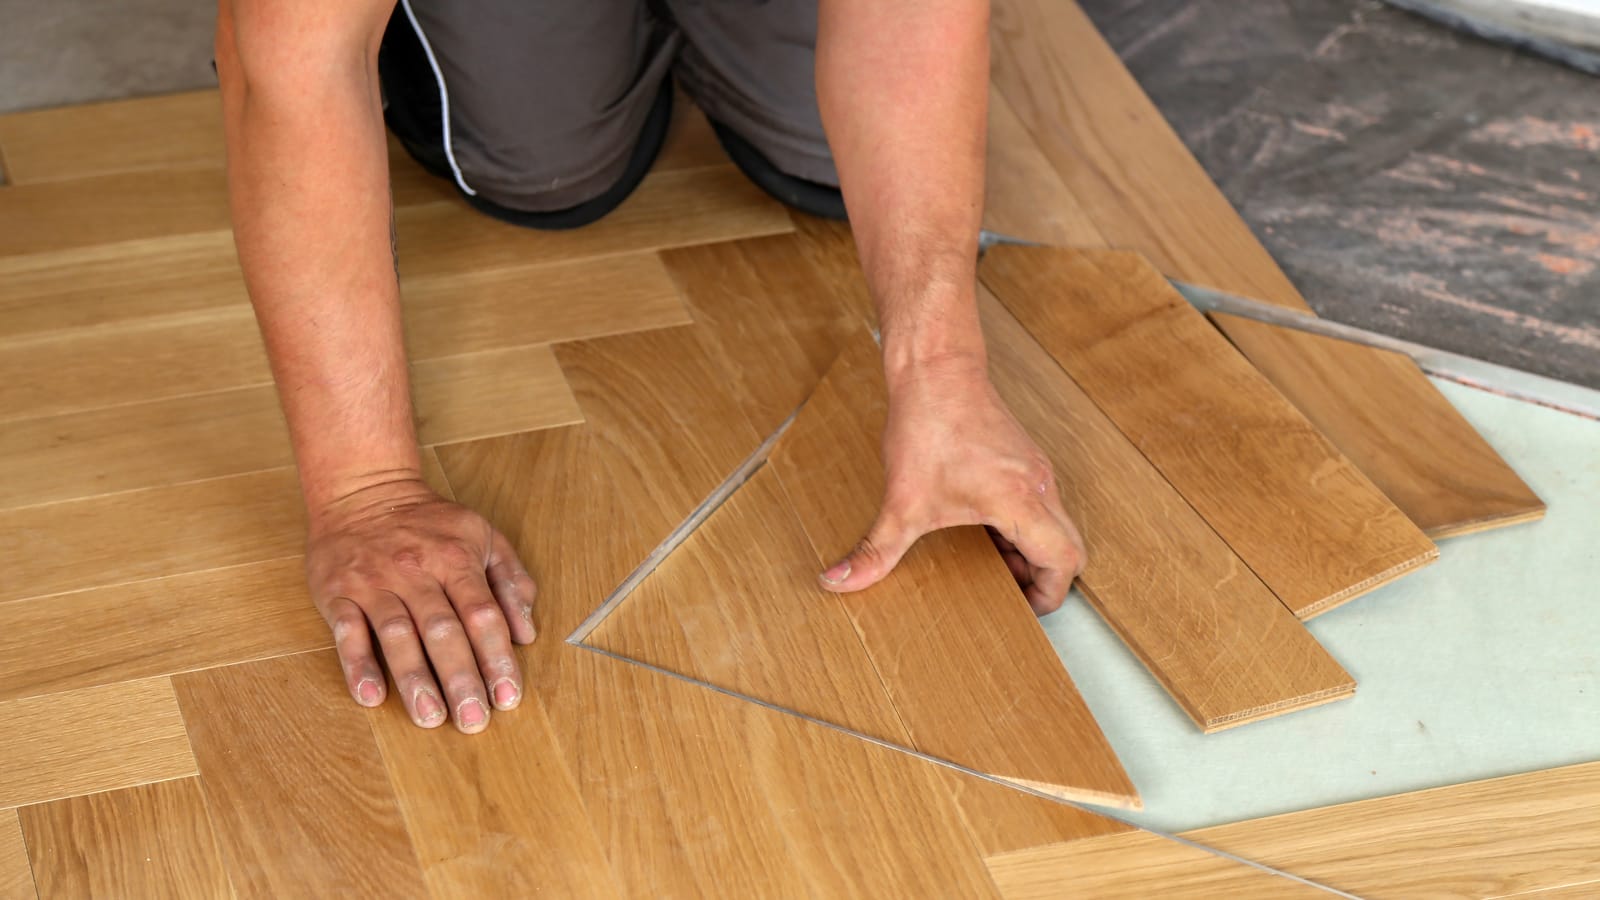 Man replacing the floorboards in a home